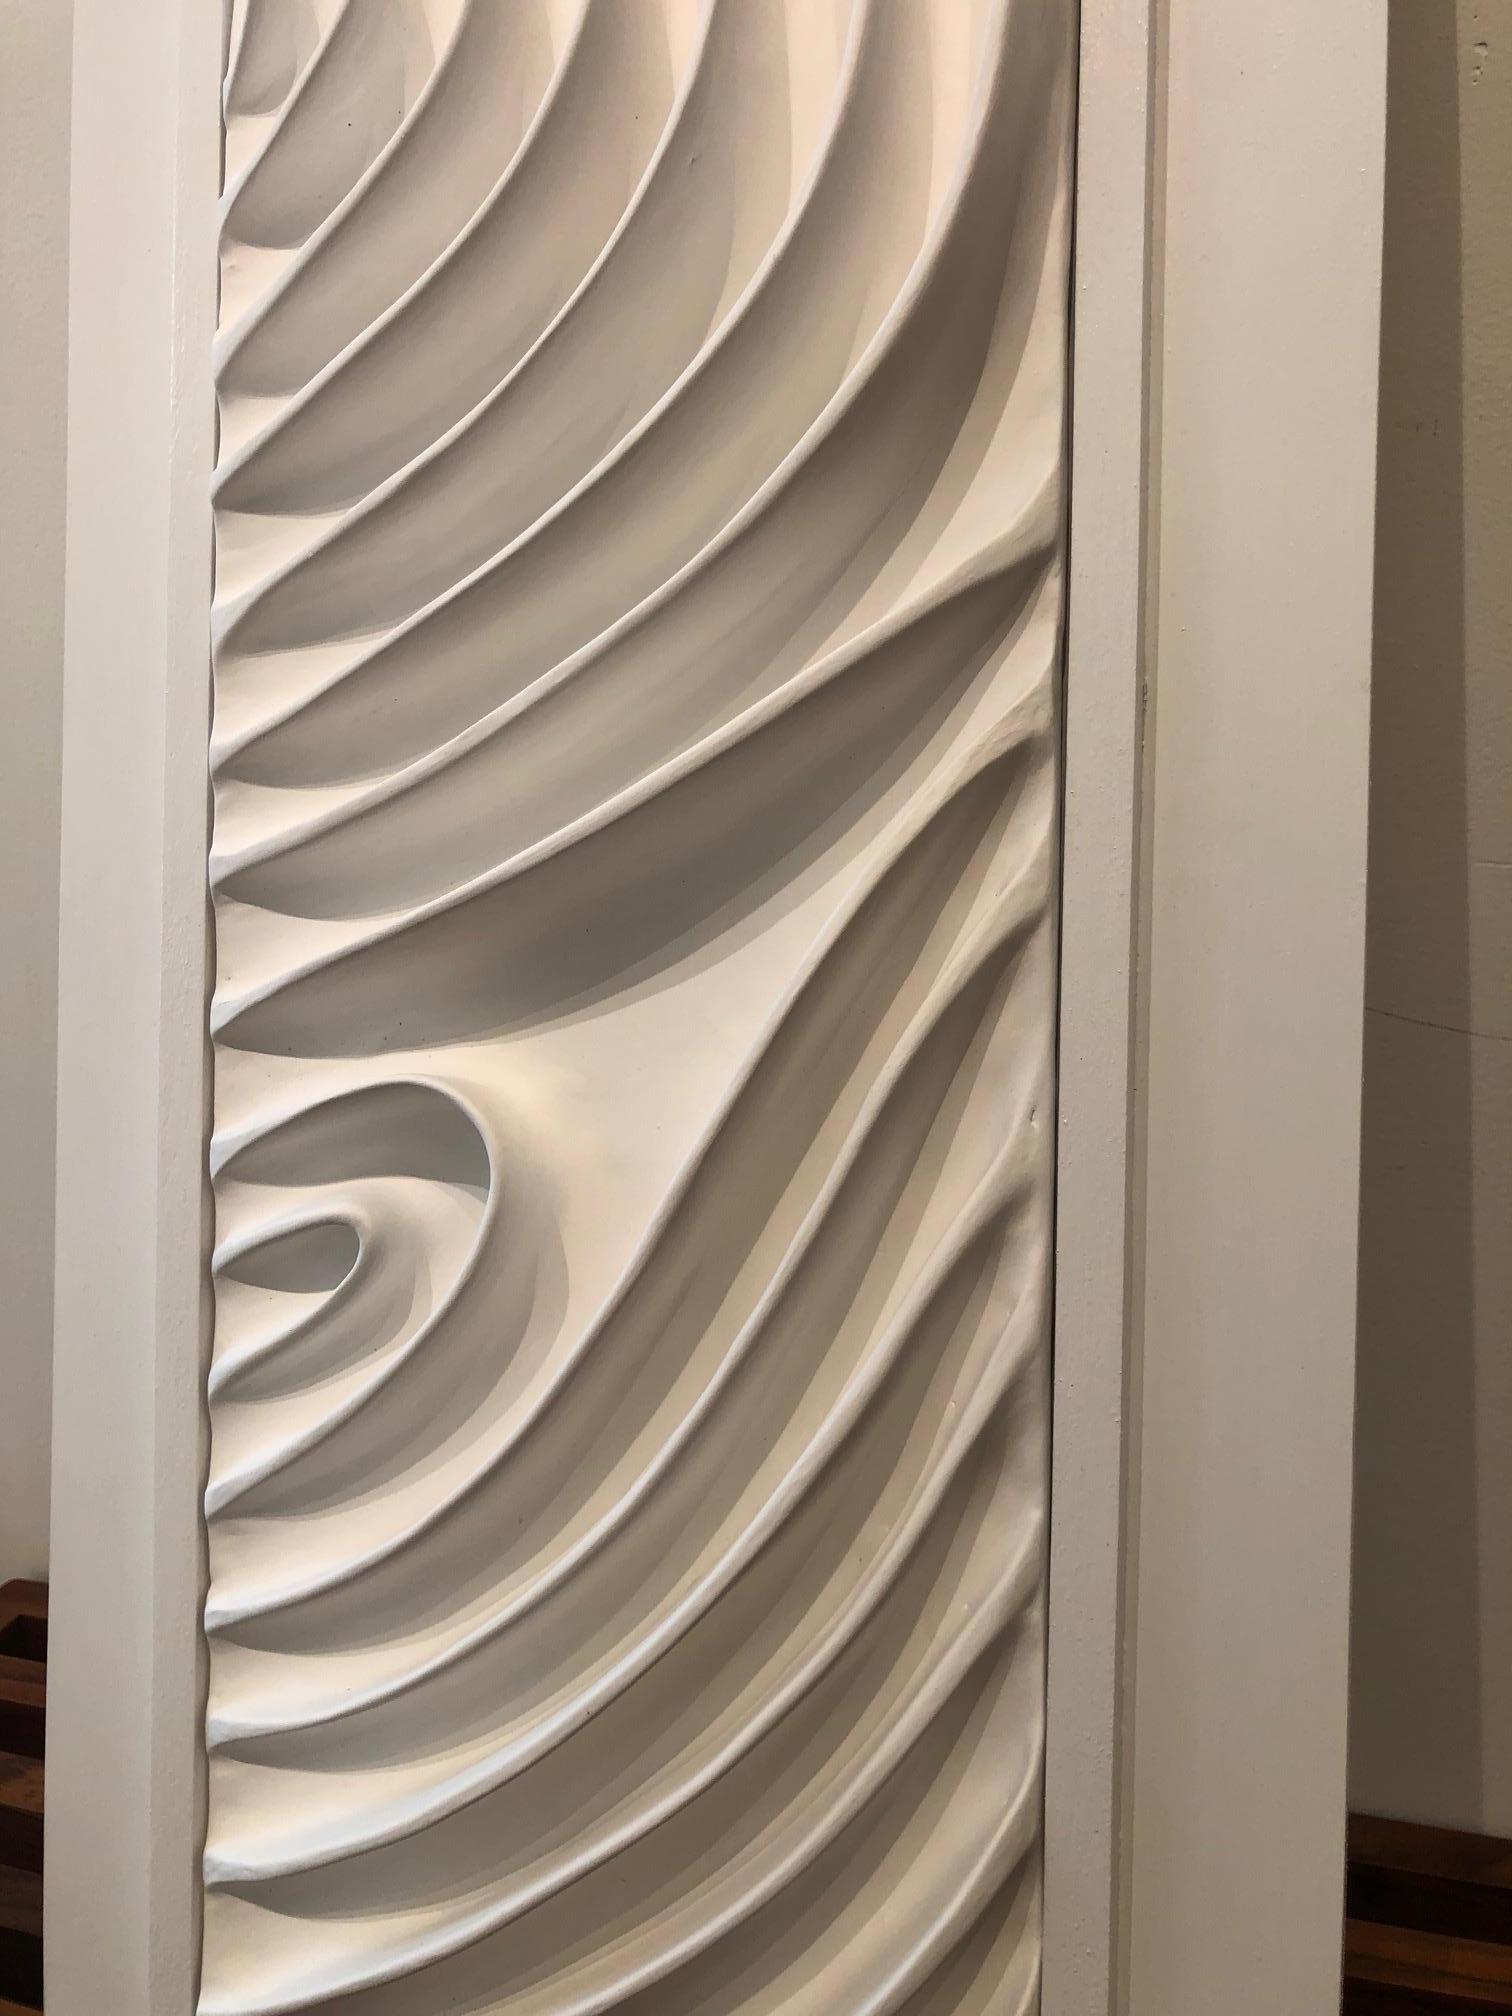 Ode VI / abstract ceramic wall sculpture in pure white - Sculpture by Jane B. Grimm